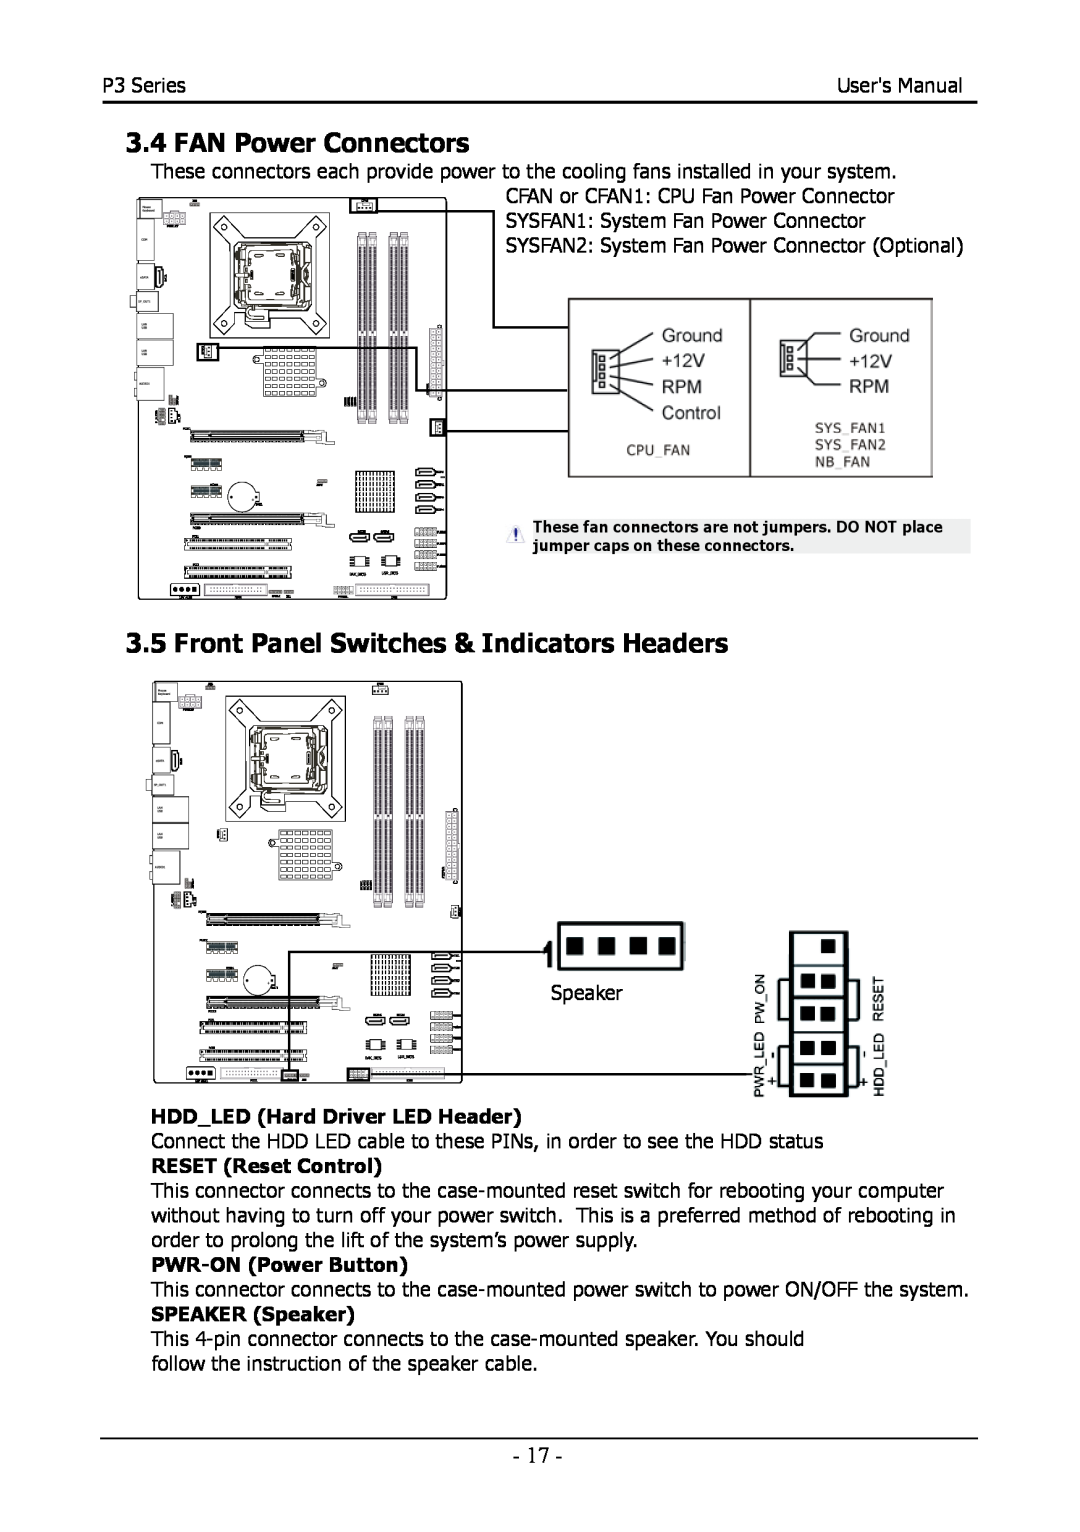 Intel 88ENEP3S00 user manual FAN Power Connectors, Front Panel Switches & Indicators Headers, HDDLED Hard Driver LED Header 